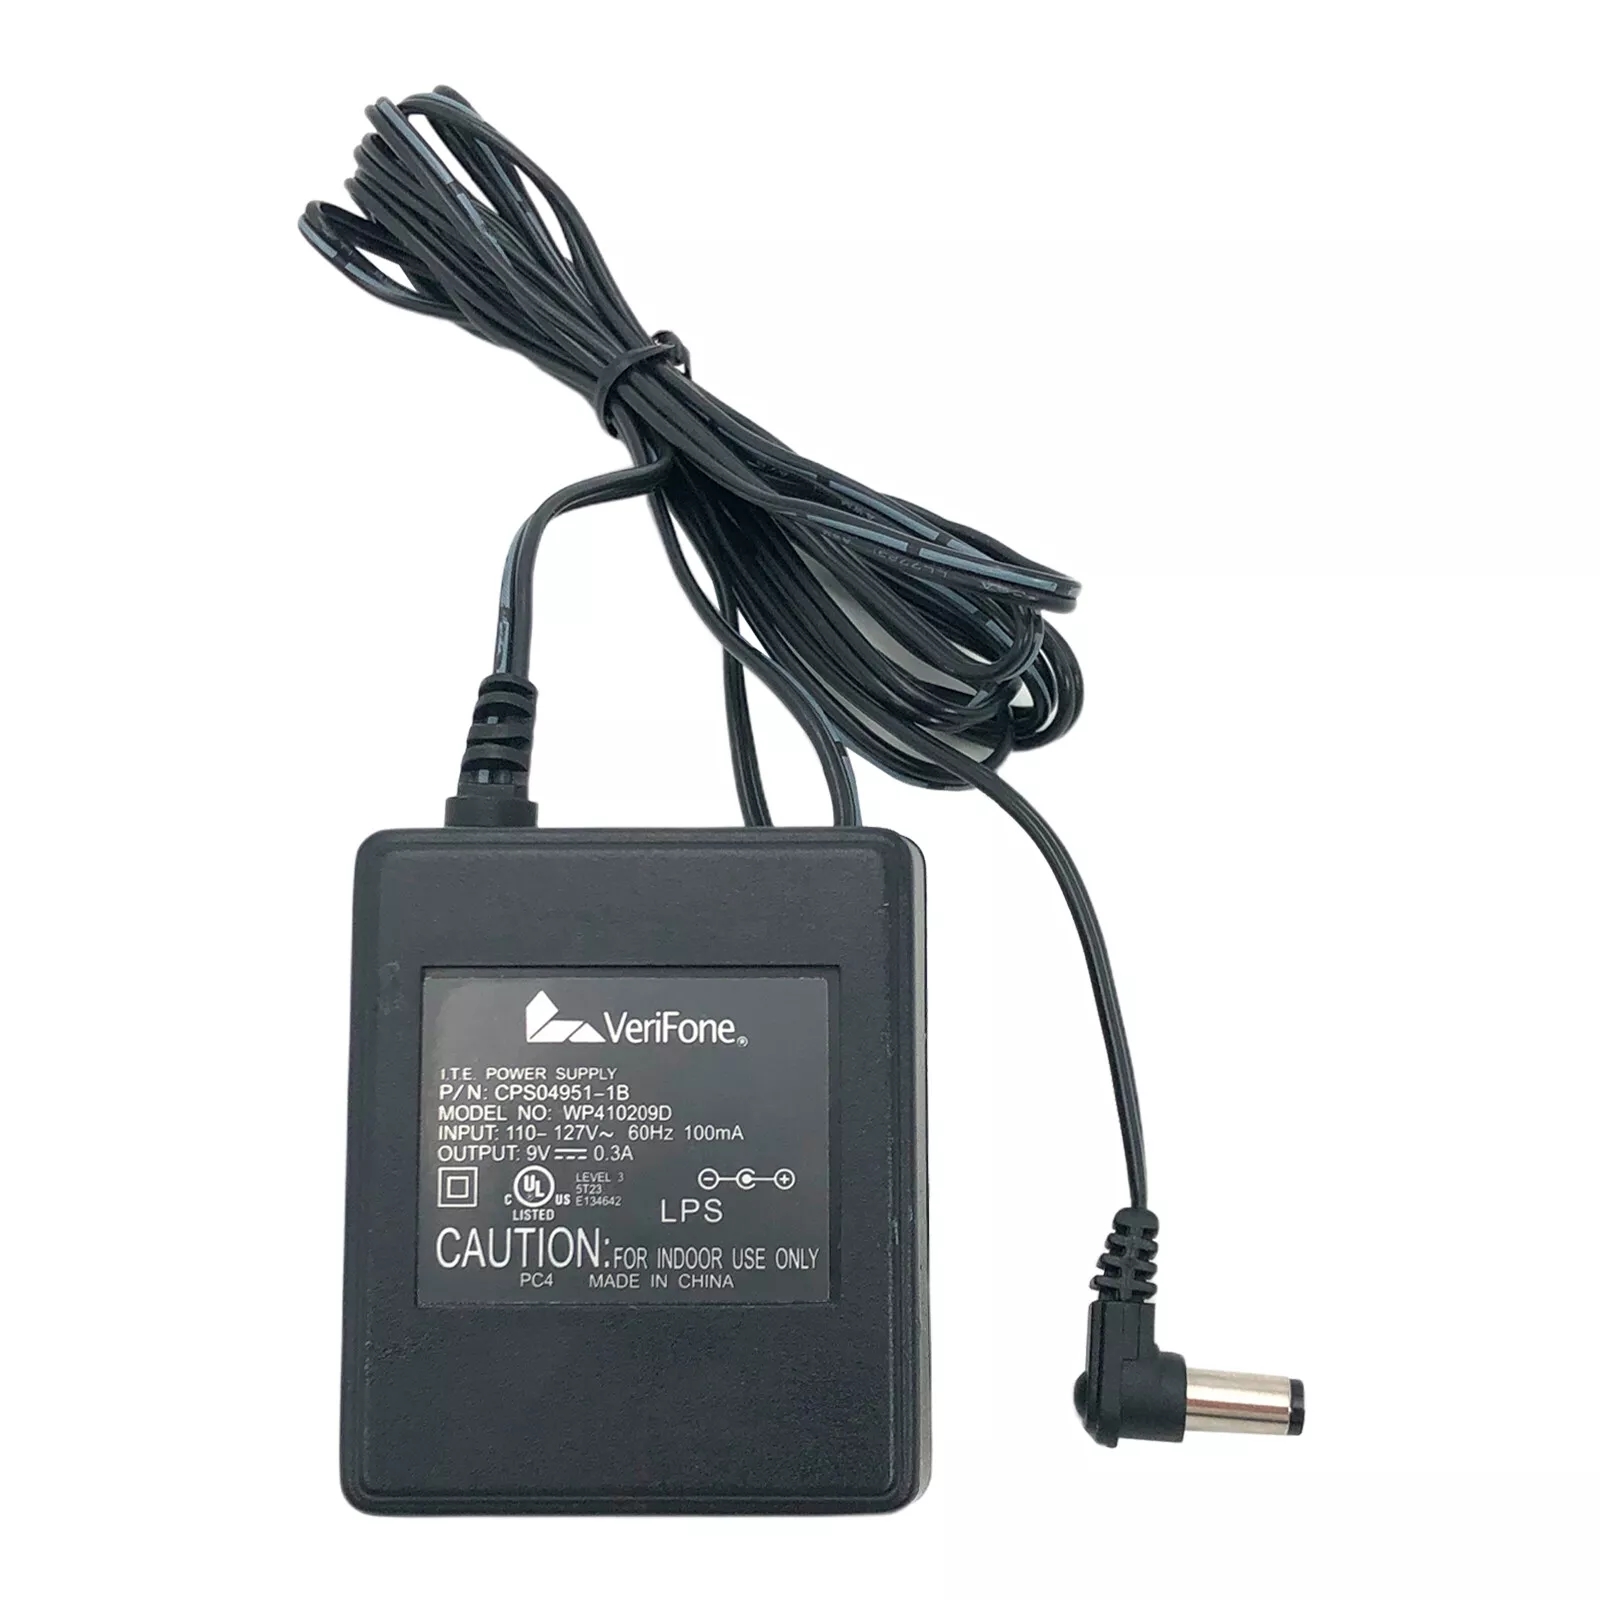 *Brand NEW*Genuine VeriFone WP410209D 9V 0.3A AC Adapter CPS04951-1B Power Supply